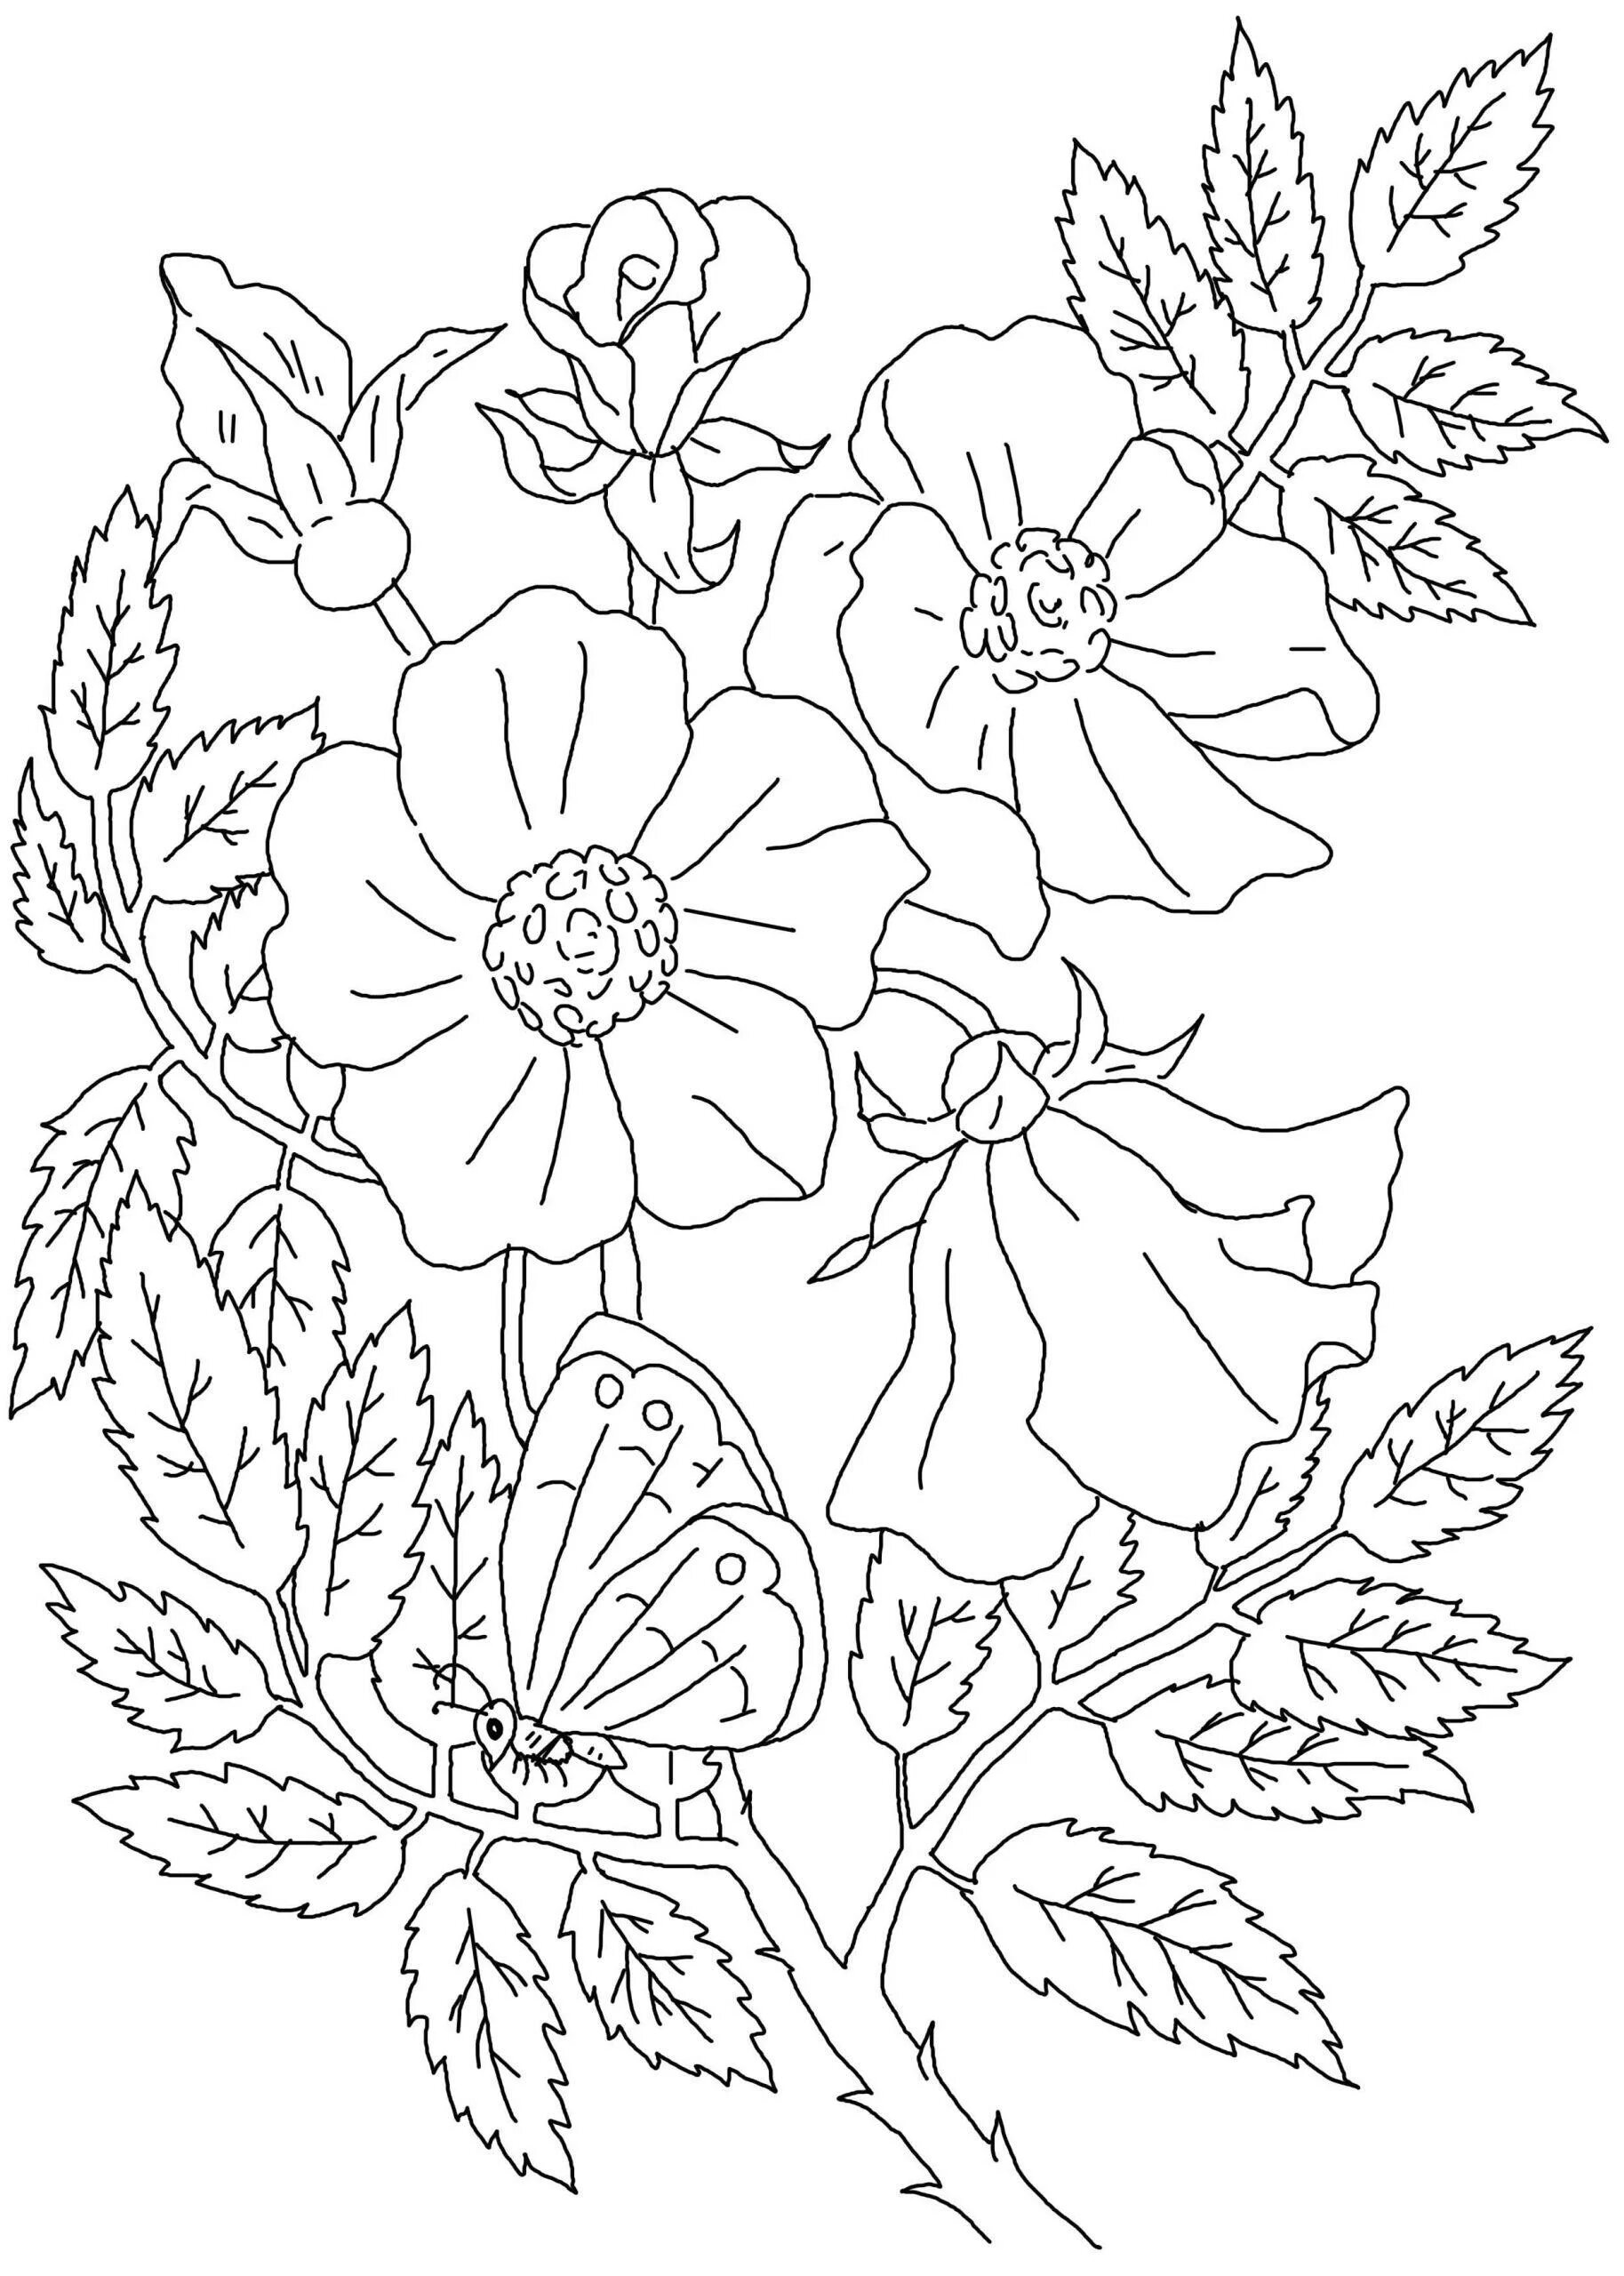 A fun coloring book for students with rose hips